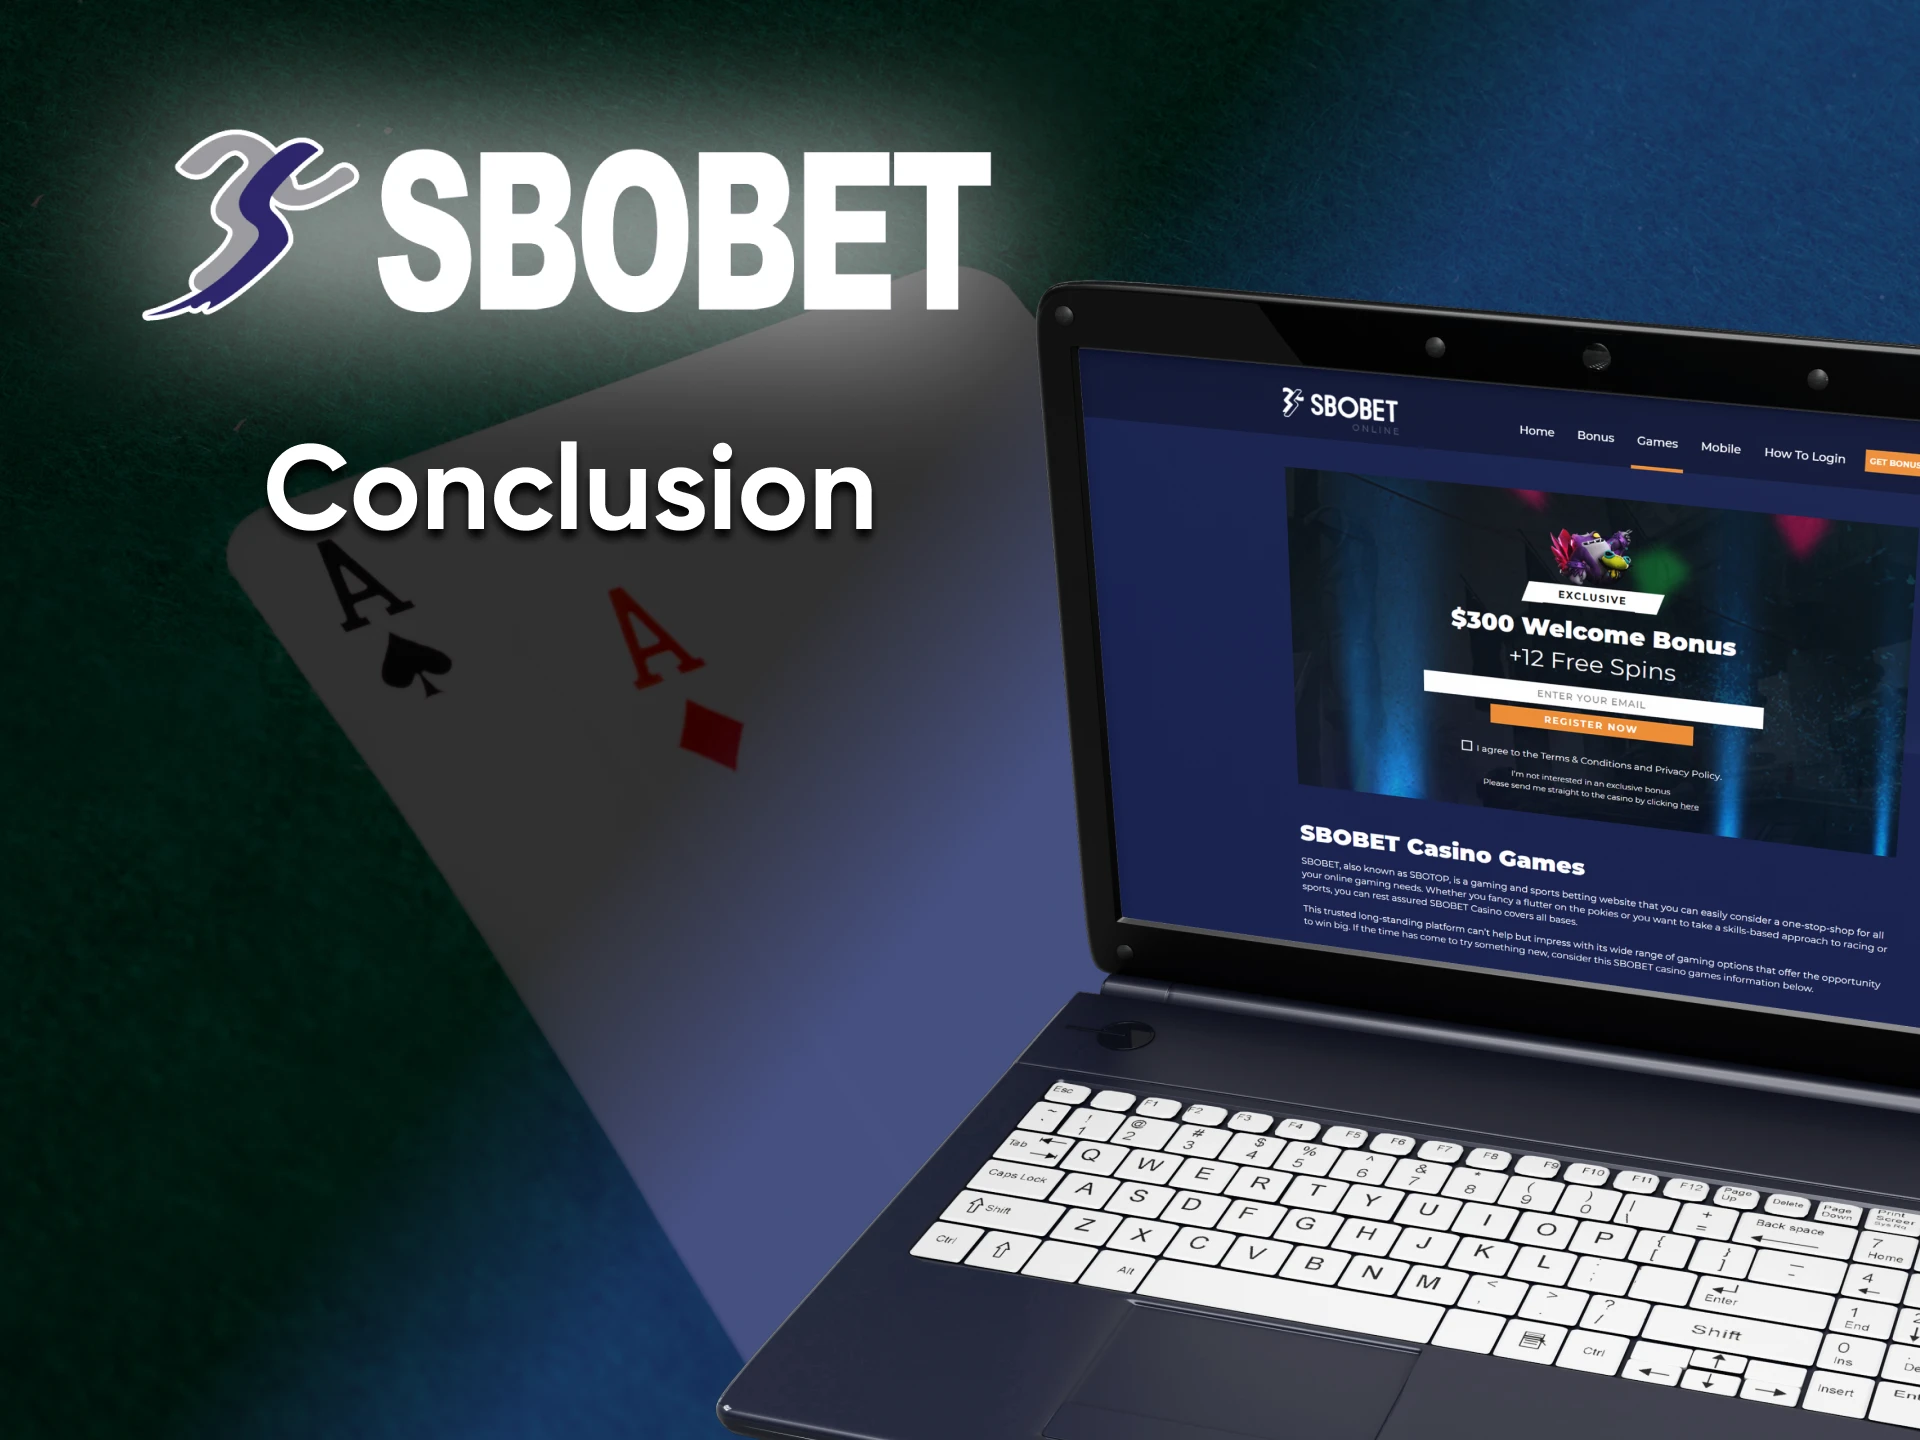 Sbobet is a platform with many casino games.